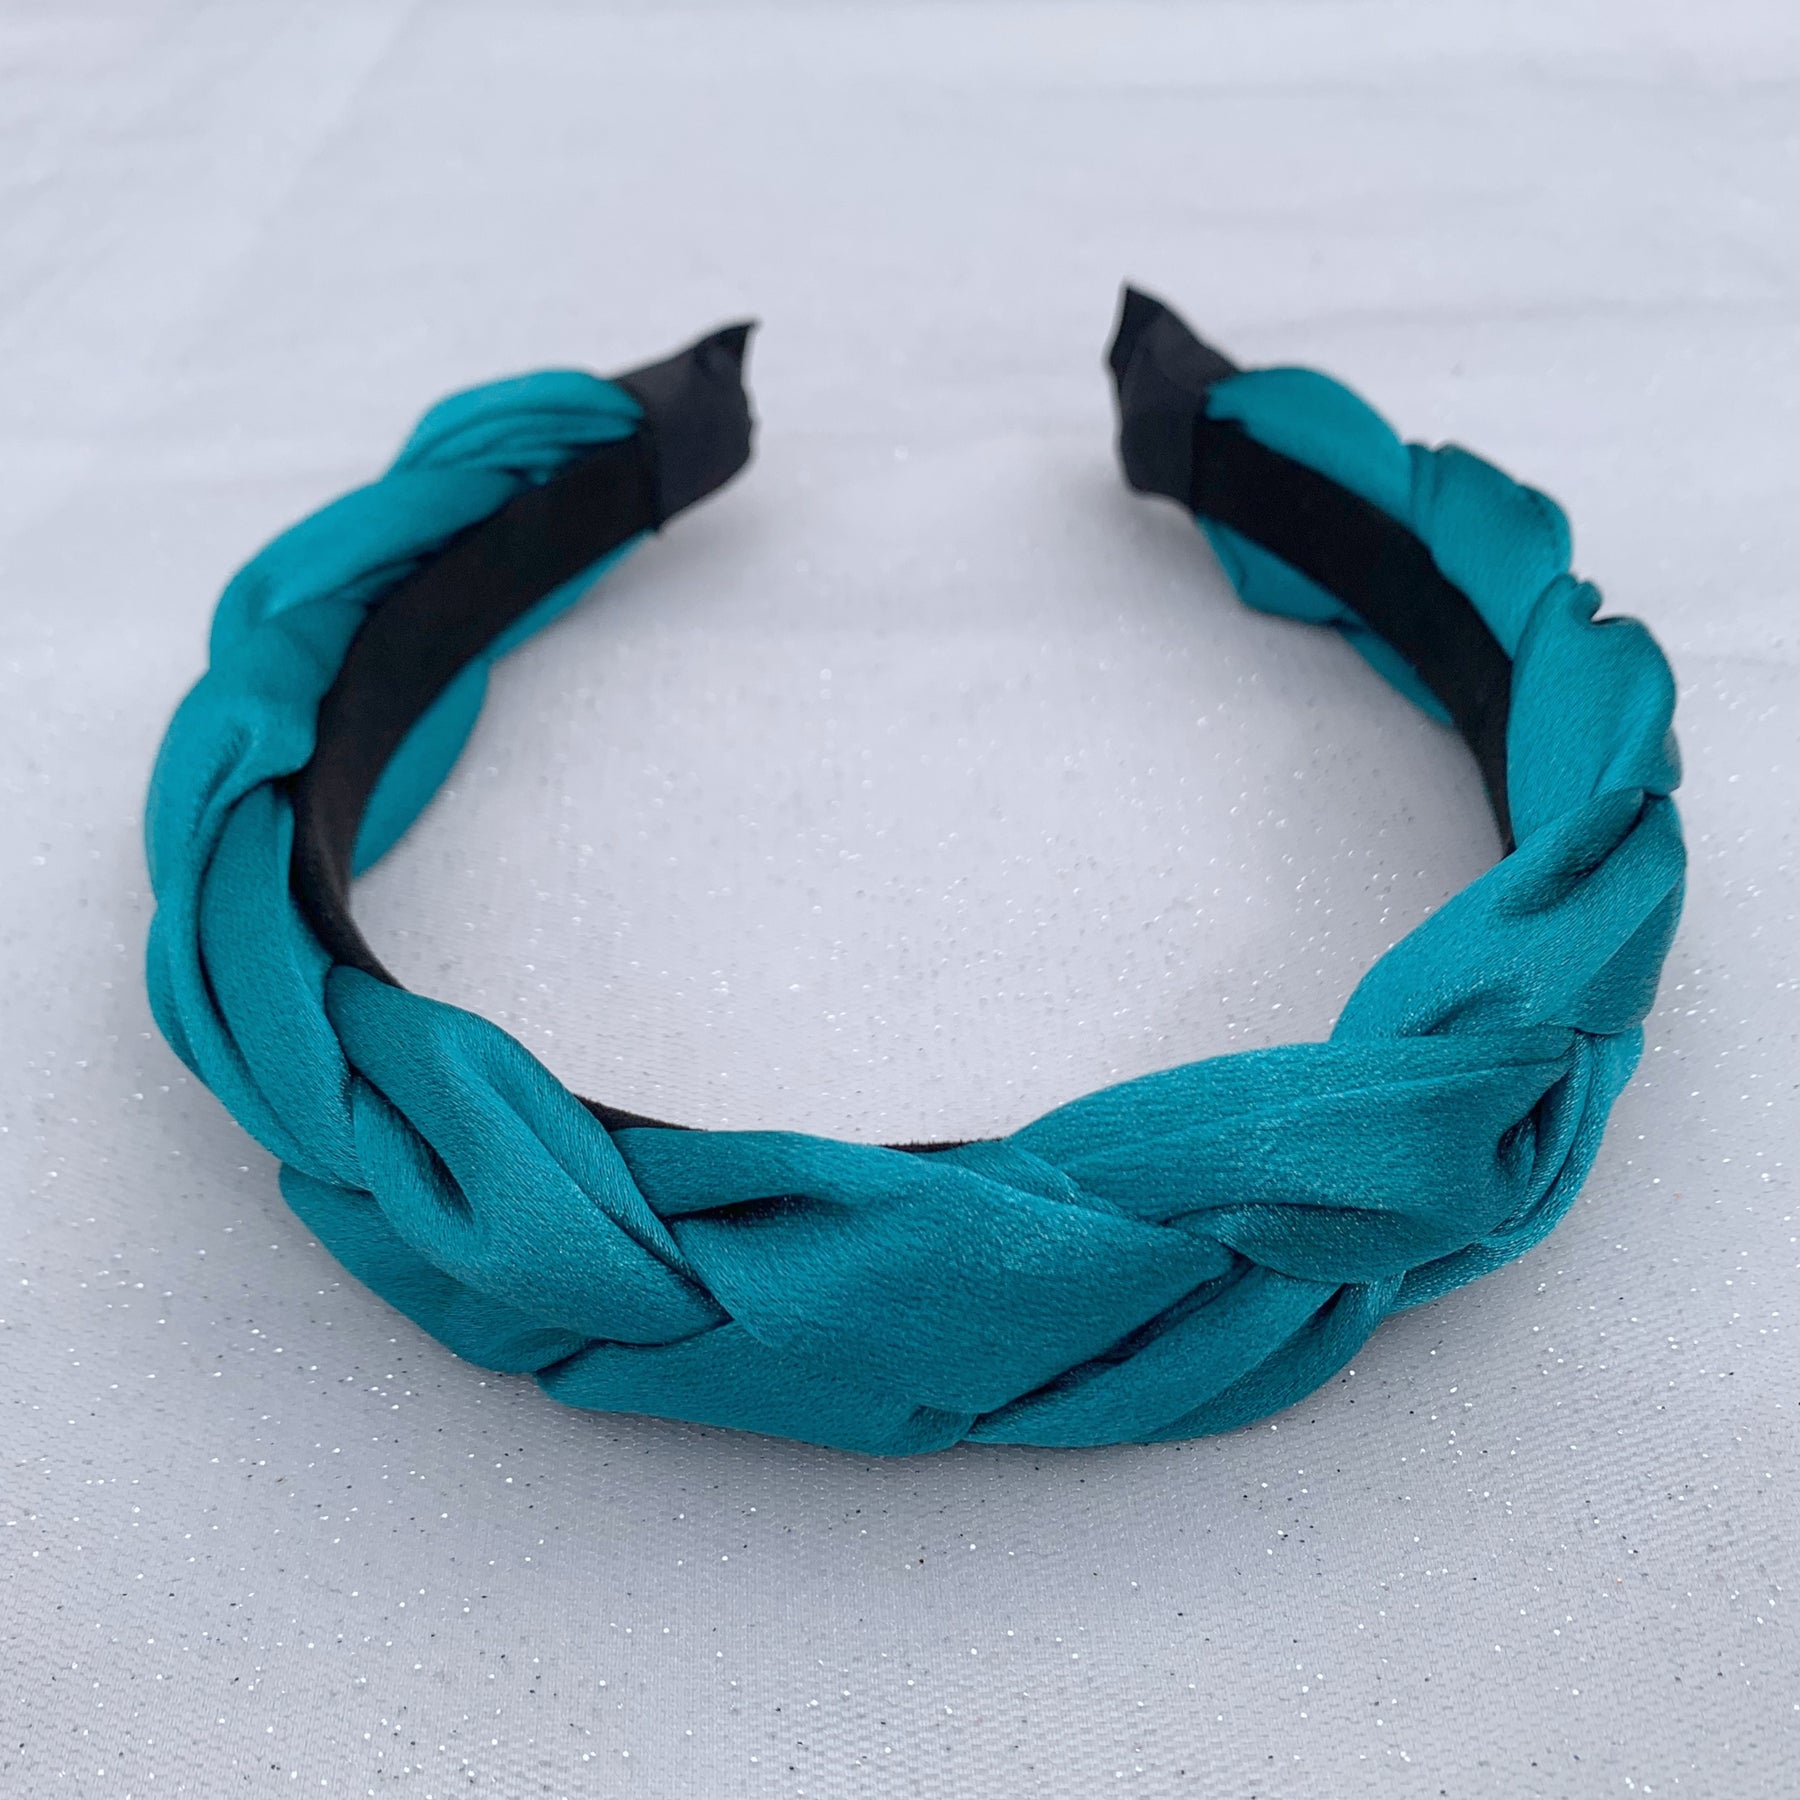 – Headband QueenMee Braided Accessories Turquoise